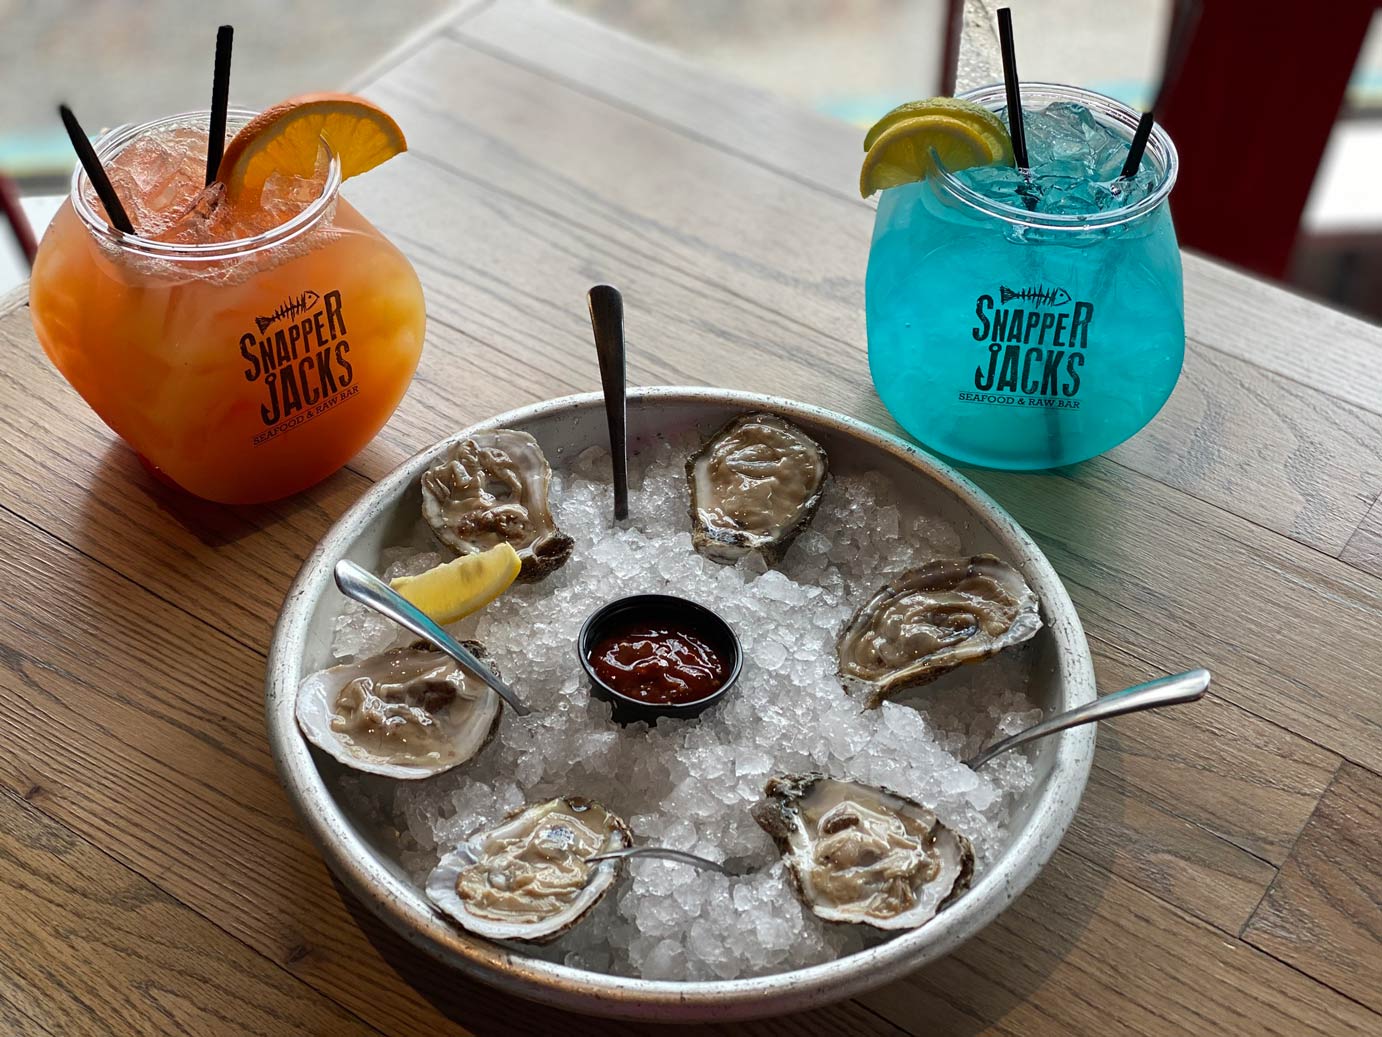 Oysters and drinks served